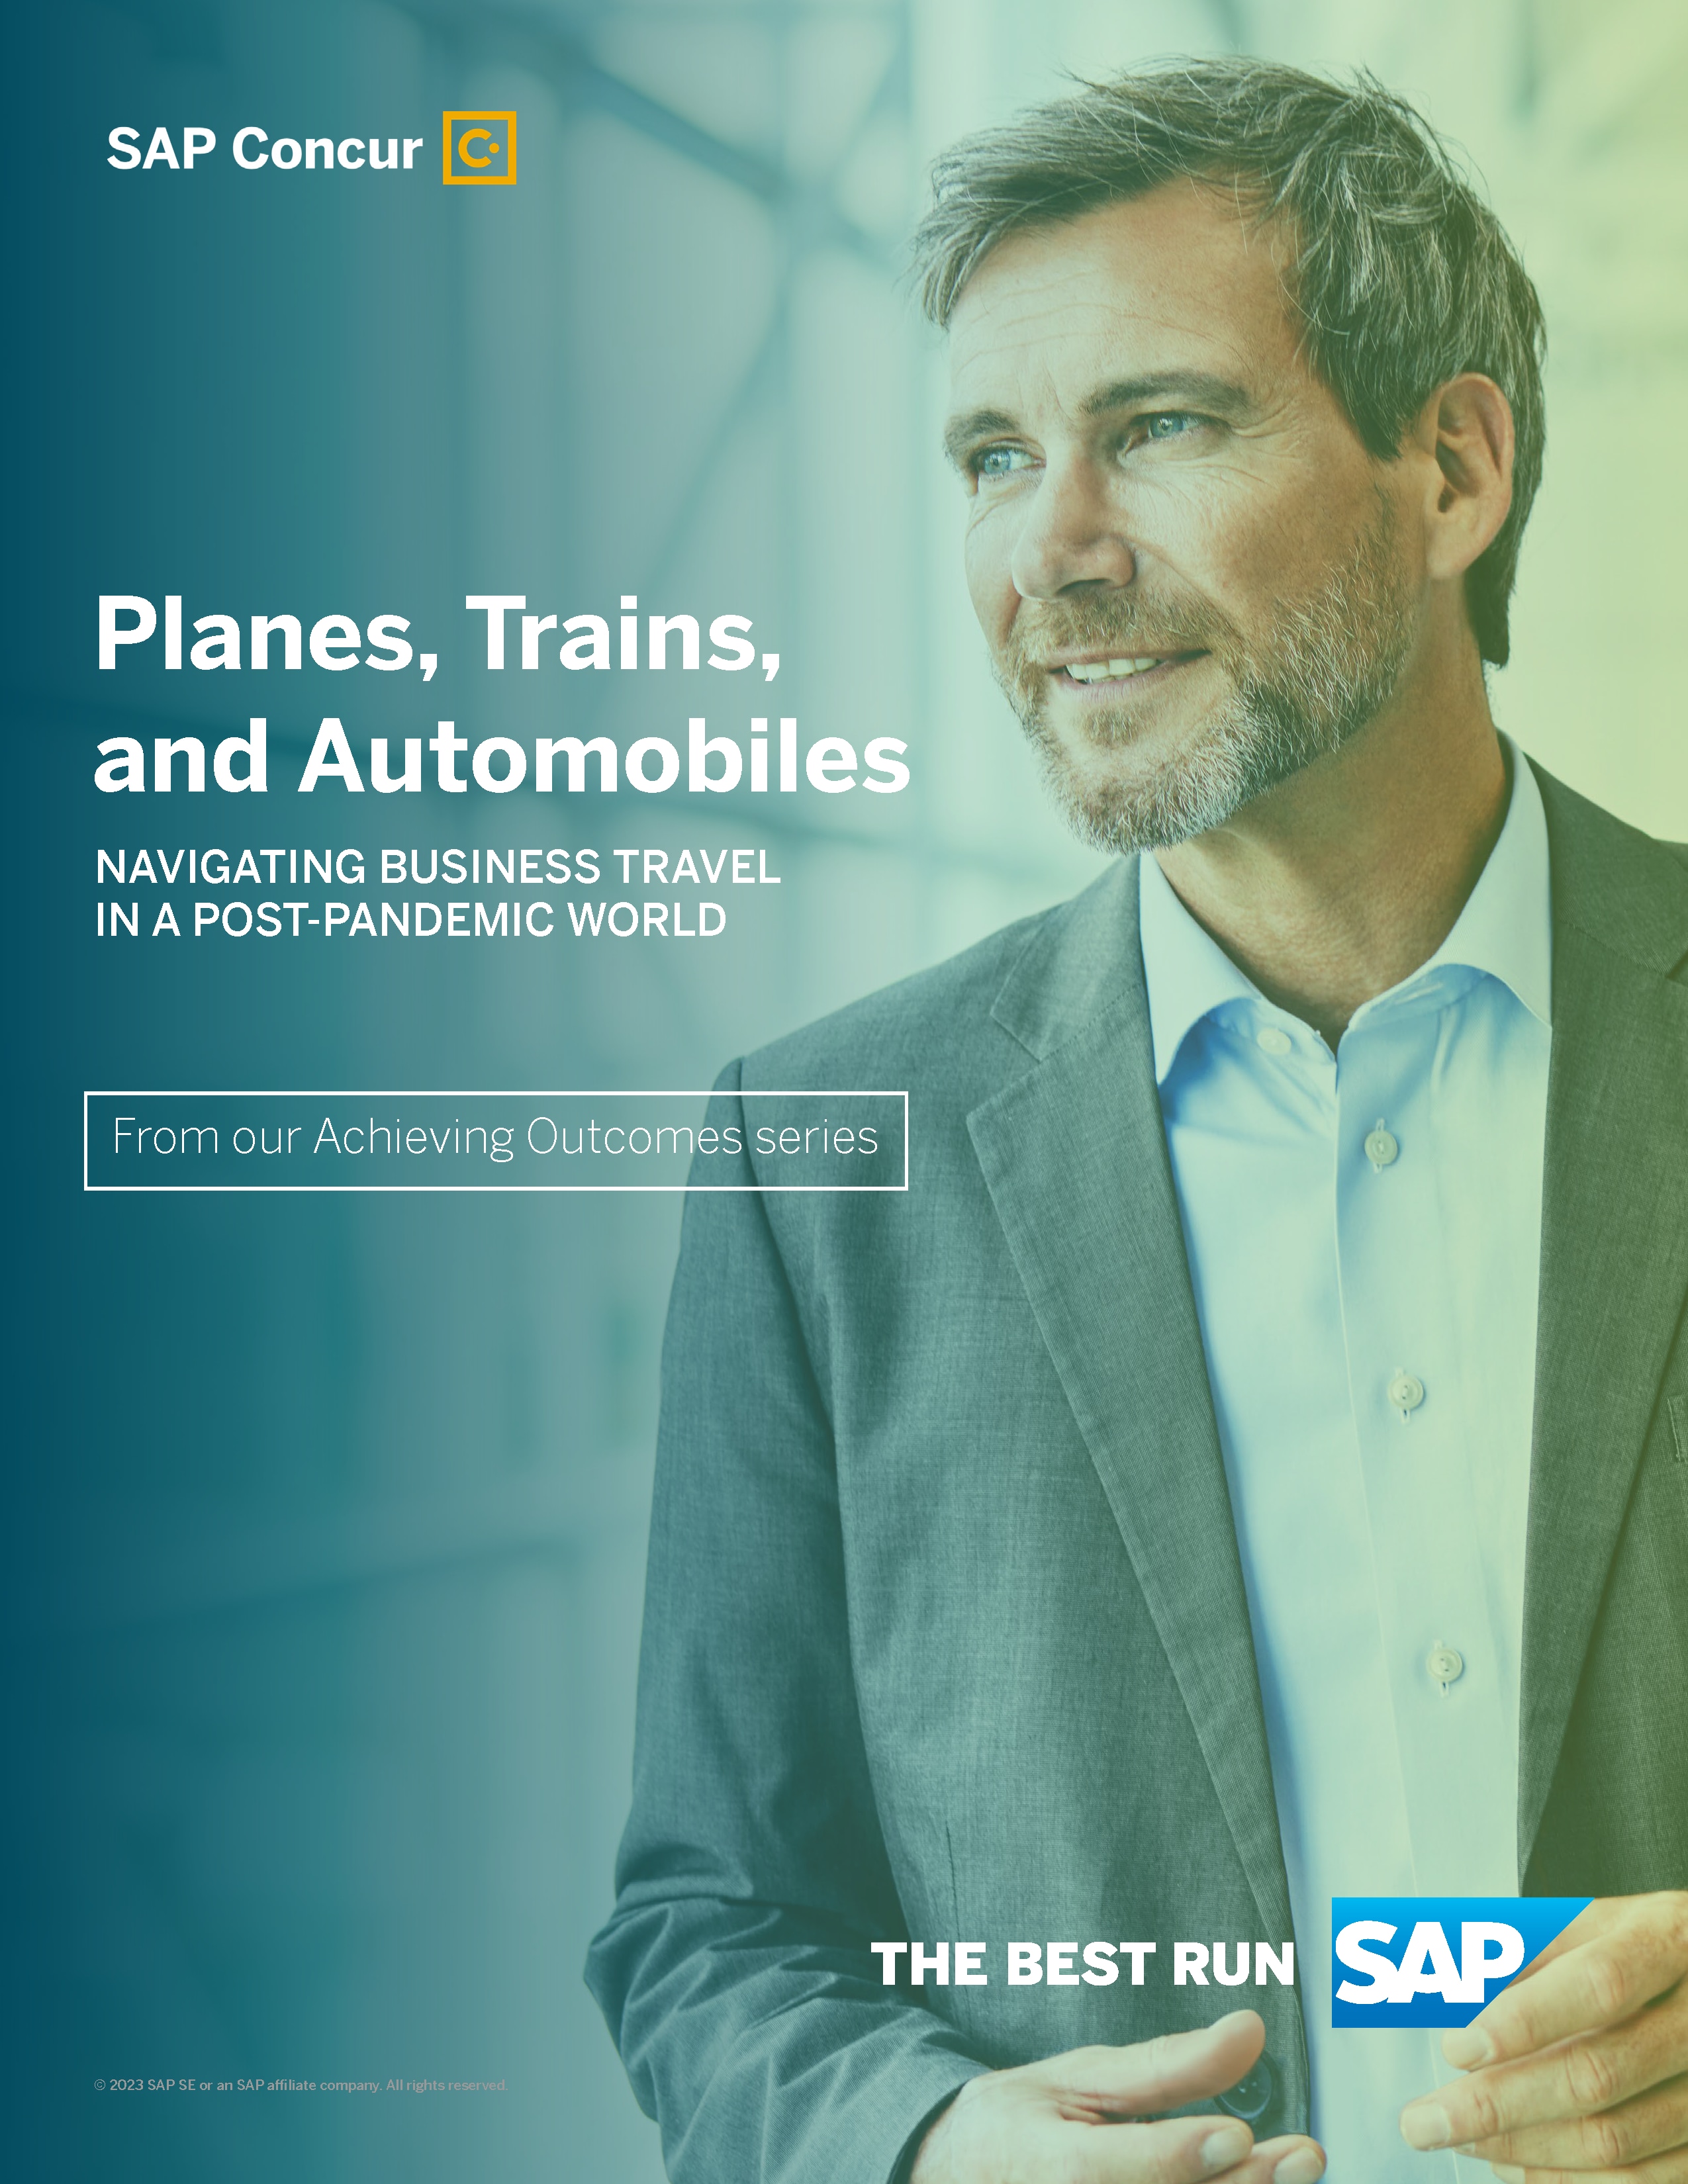 Planes, Trains, and Automobiles: Navigating Business Travel in a Post-Pandemic World